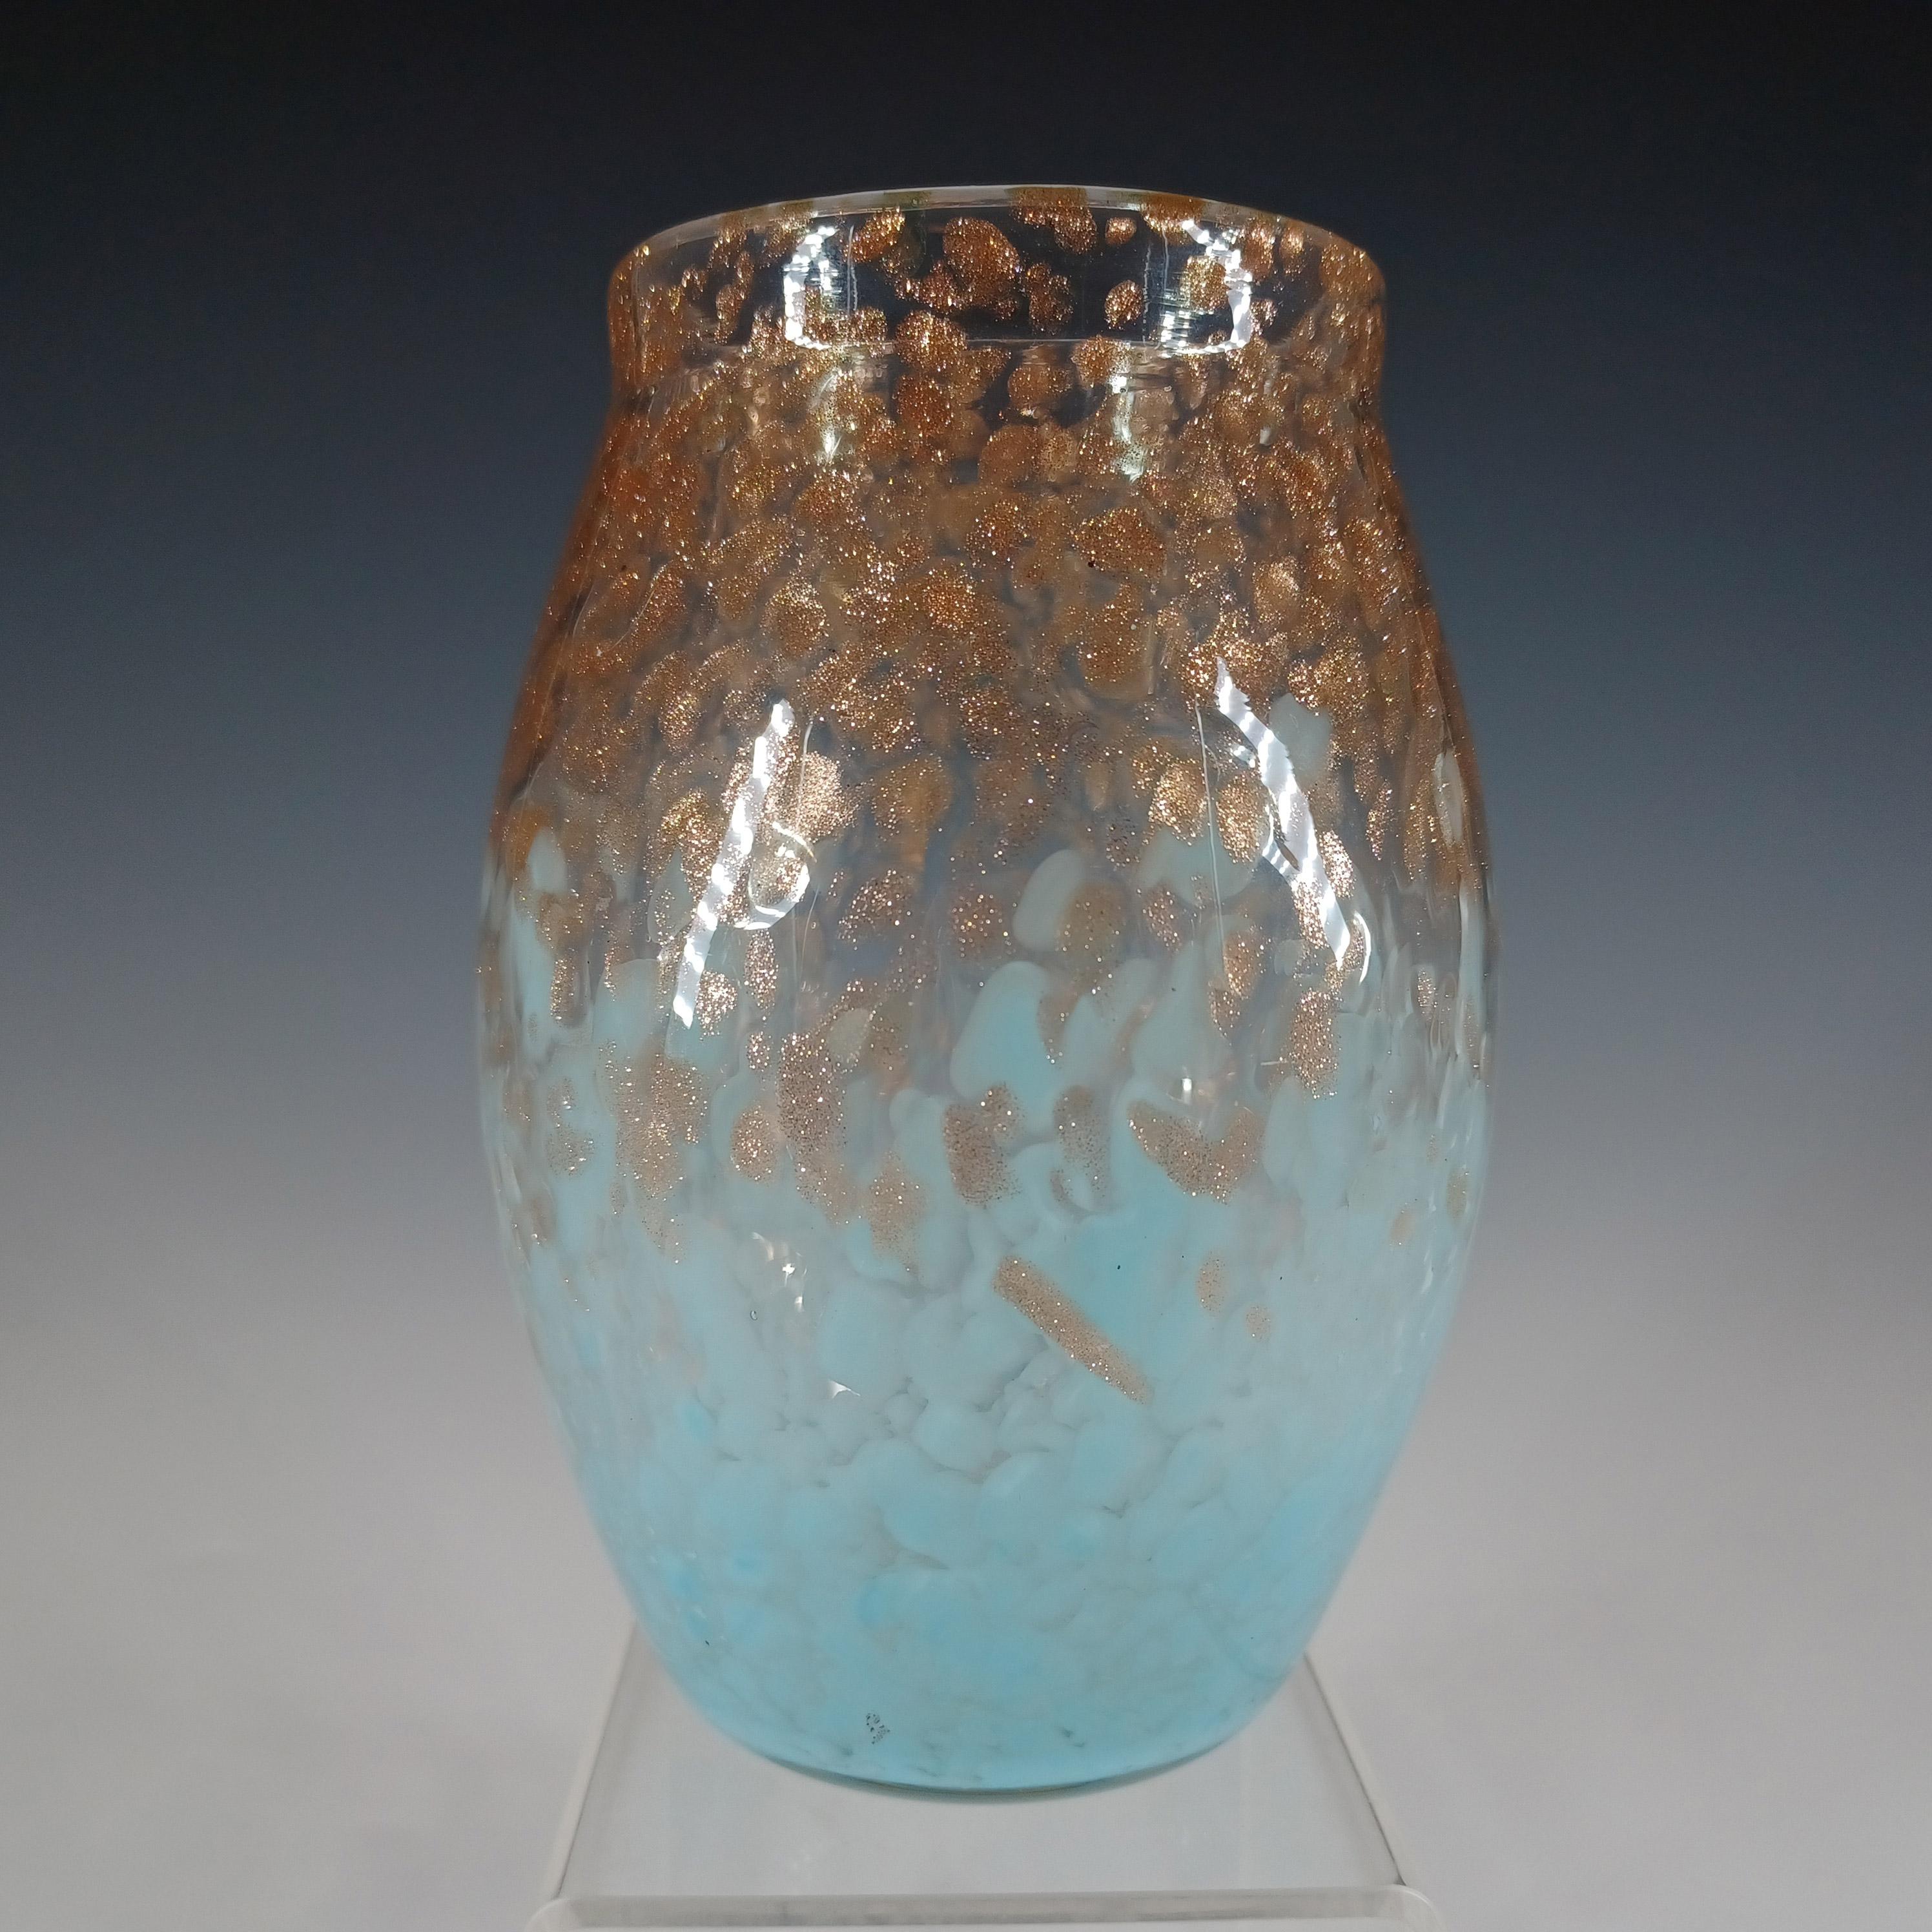 A small Monart pale blue mottled glass vase with speckles of copper aventurine. Made by the Scottish Moncrieff's factory in the 1930's/40's, shape number MF. Unmarked but has the classic Monart base finish (raised pontil and flat outer